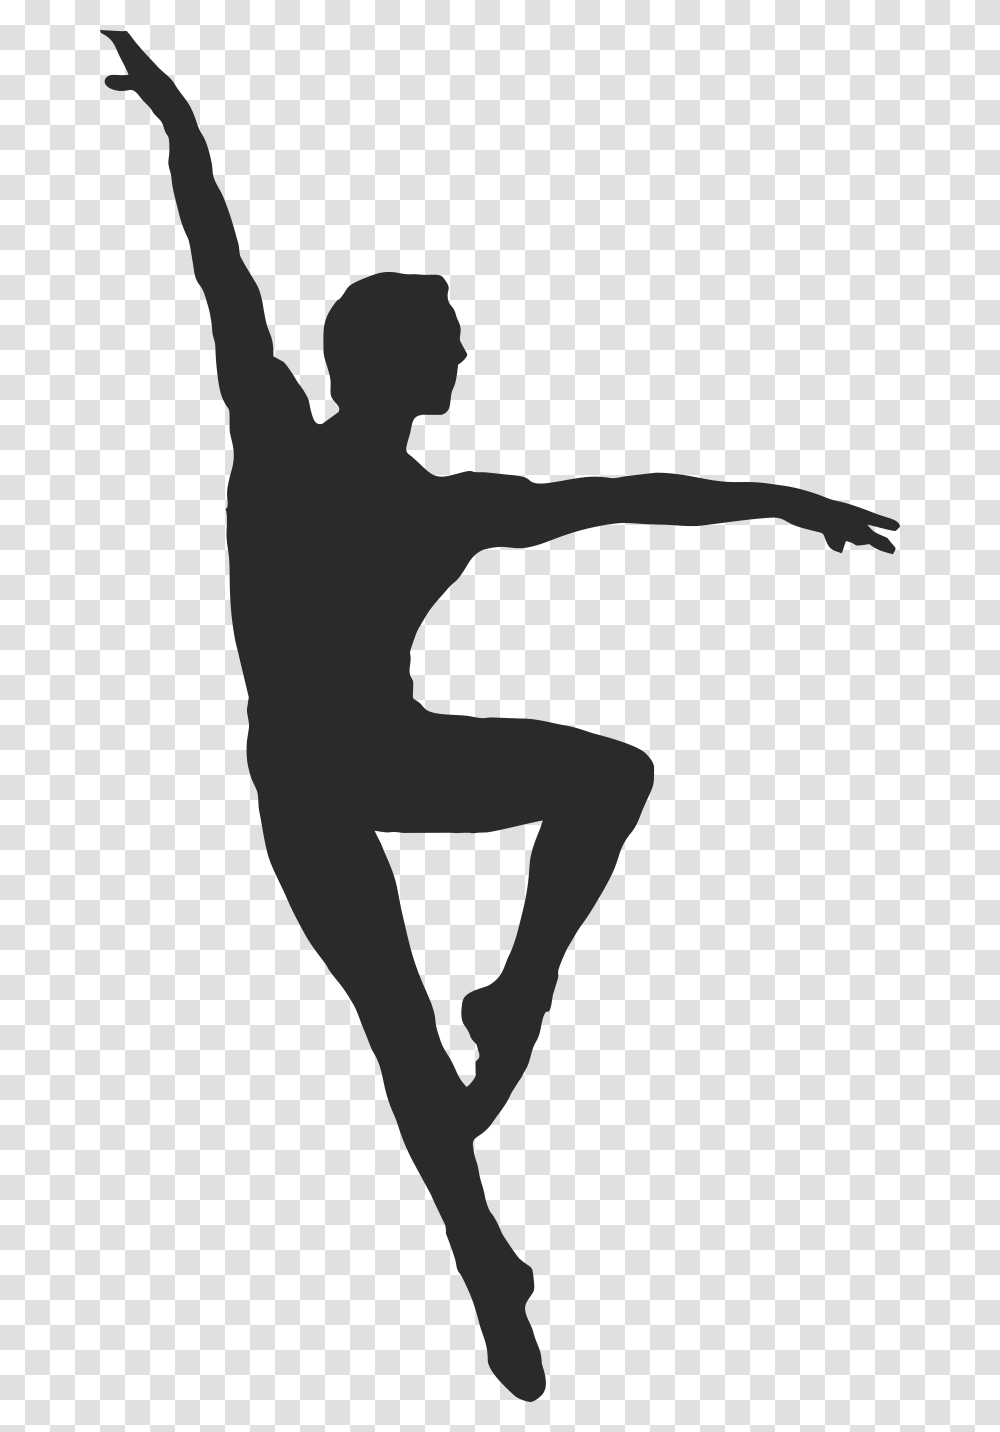 Dancer Images Free Male Dancer Silhouette Free, Person, Human, Dance Pose, Leisure Activities Transparent Png